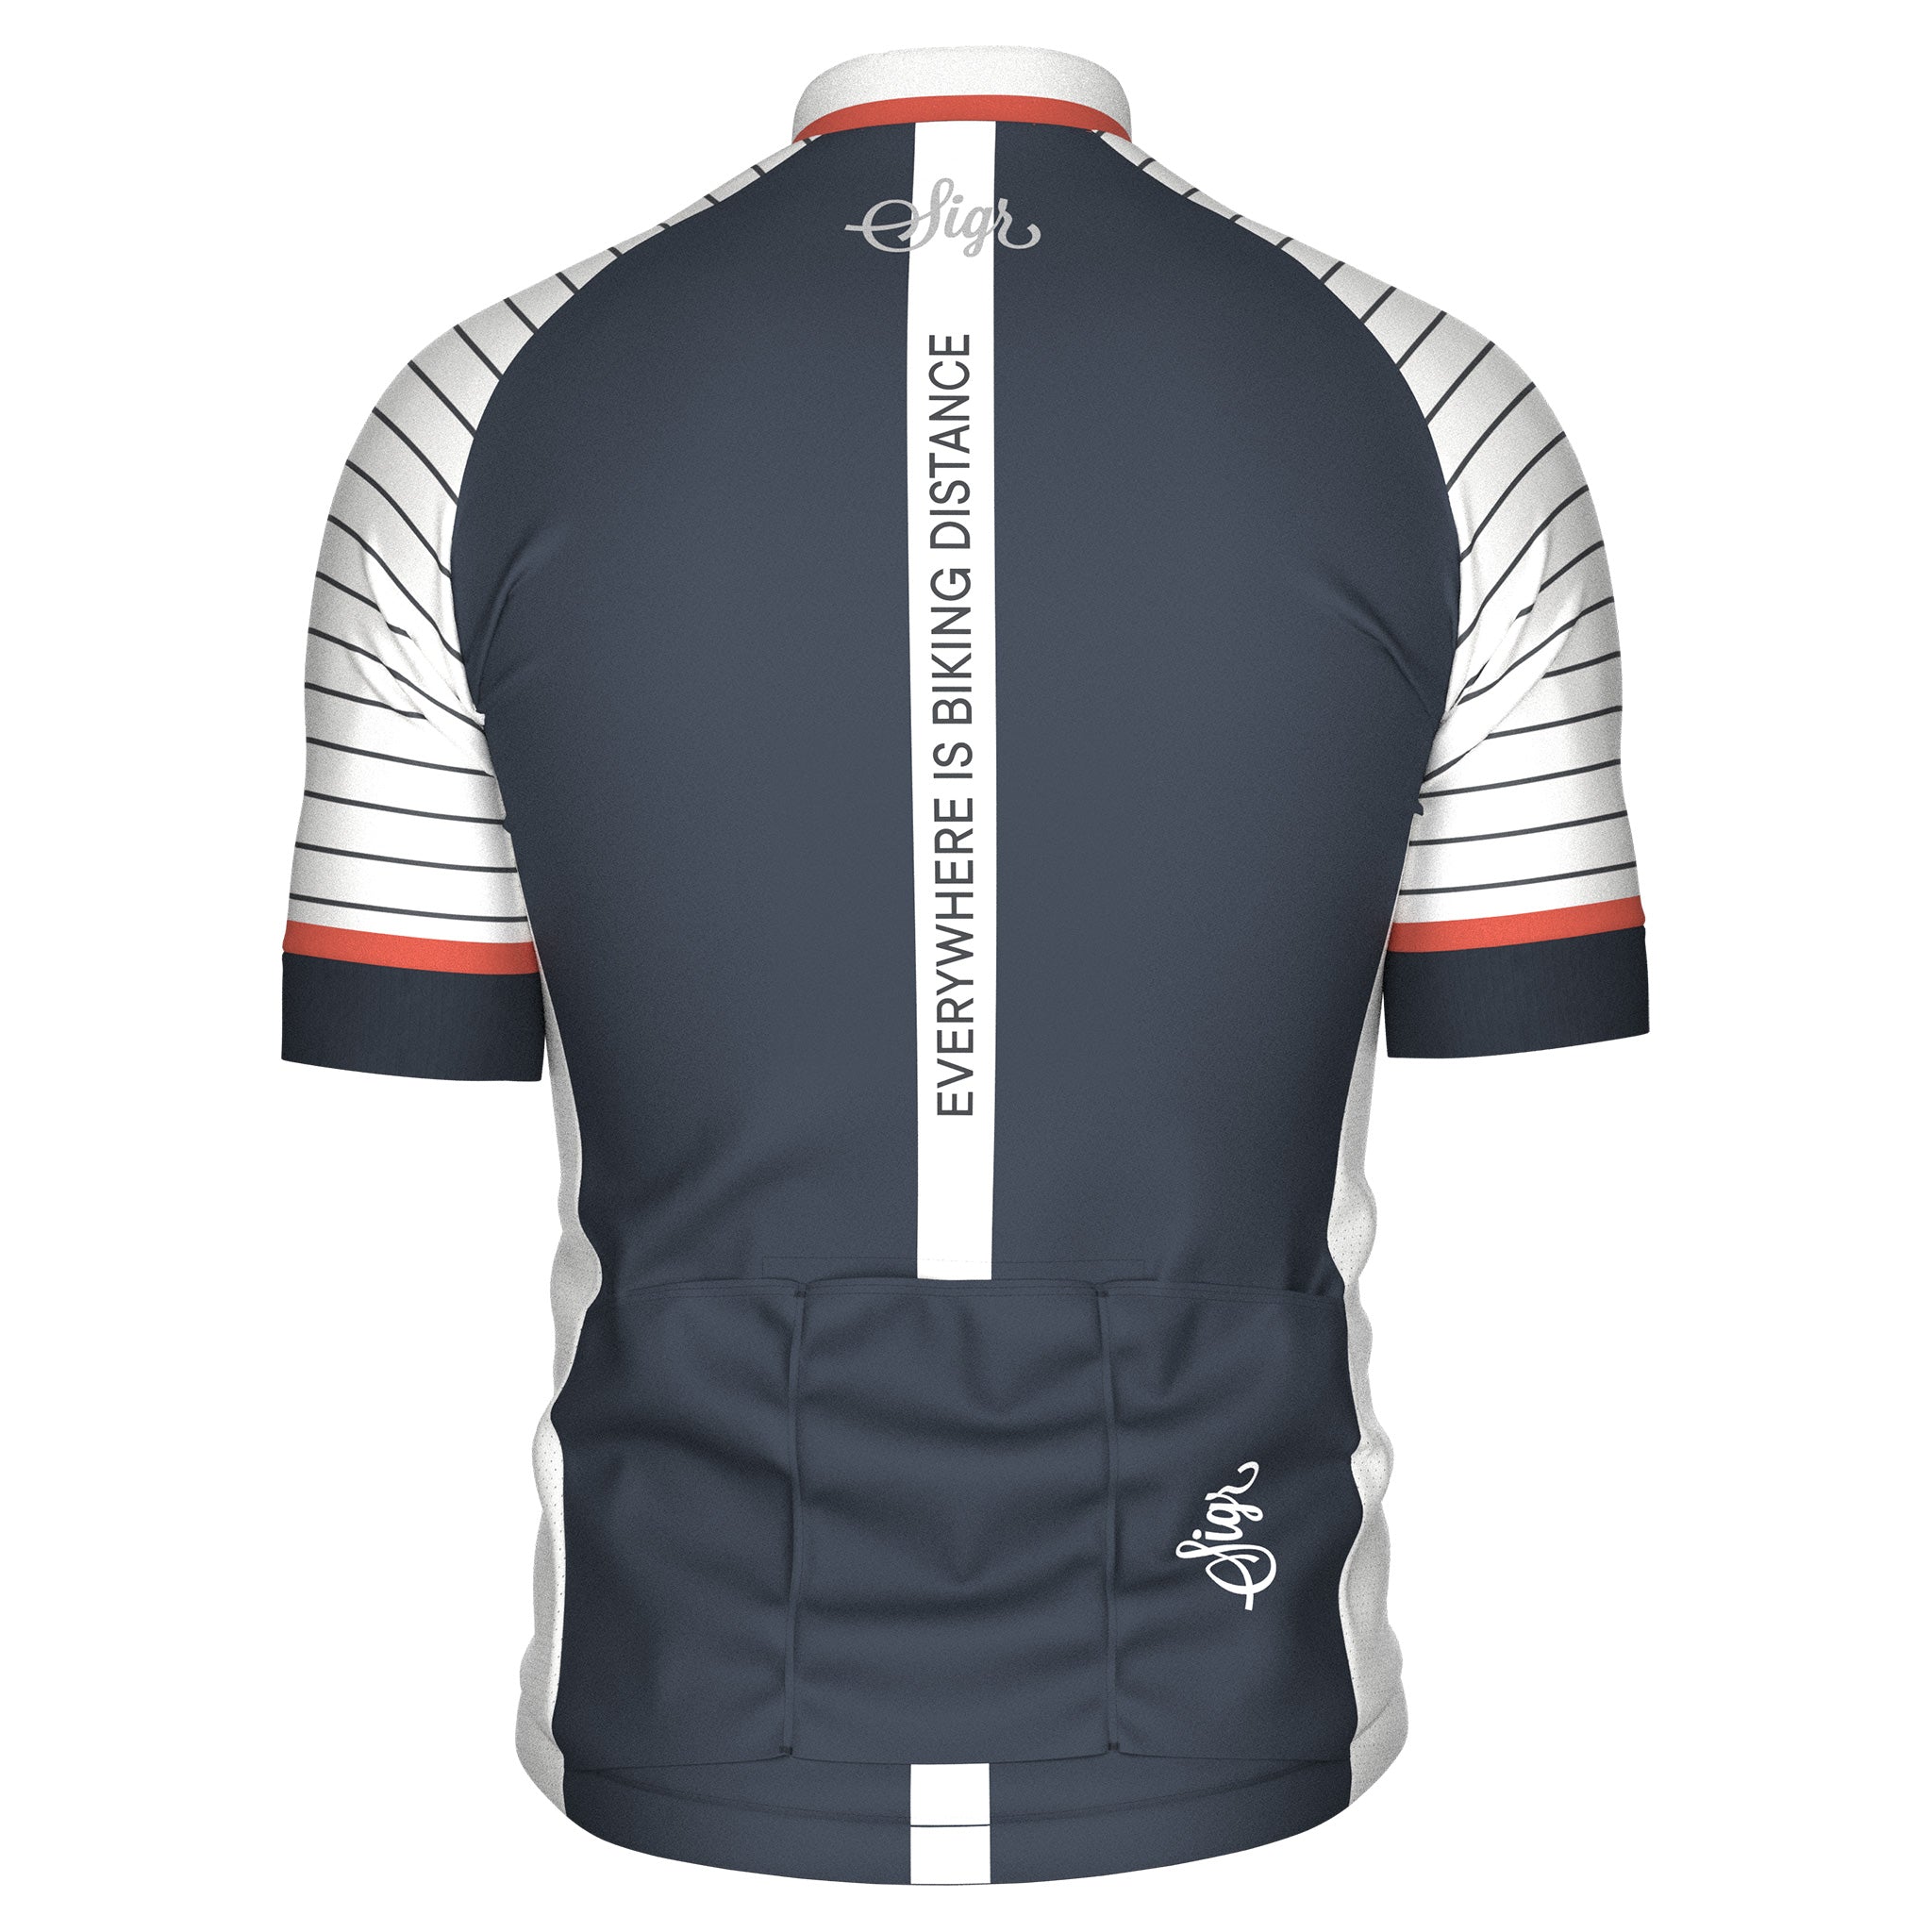 White Horizon with Back Slogan - Road Cycling Jersey for Men